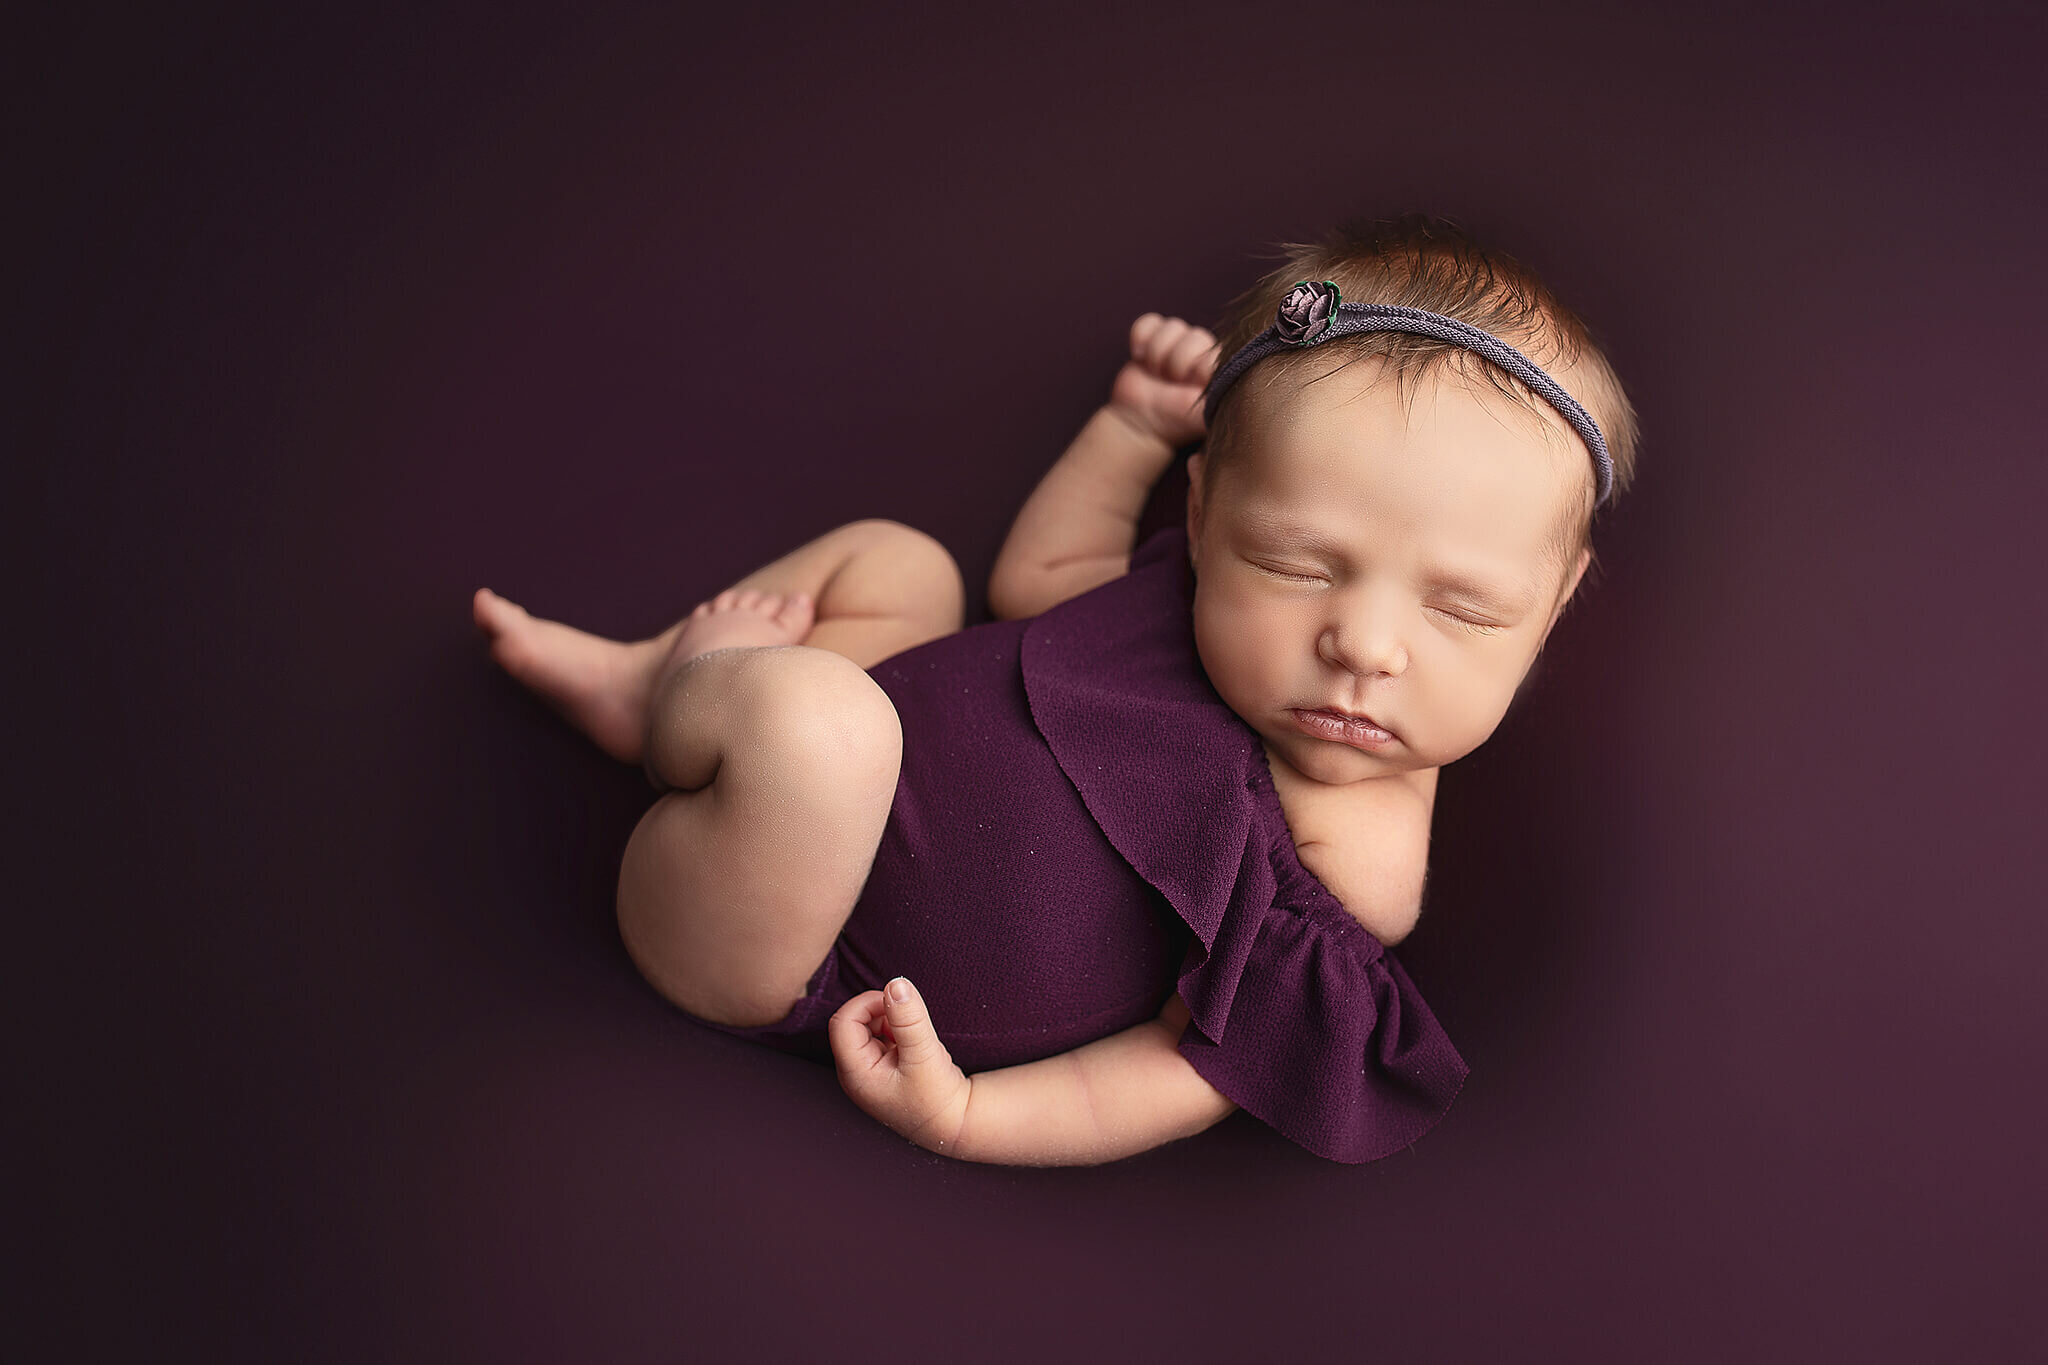 newborn baby girl on purple blanket in a cute purple outfit while sweetly sleeping on her back